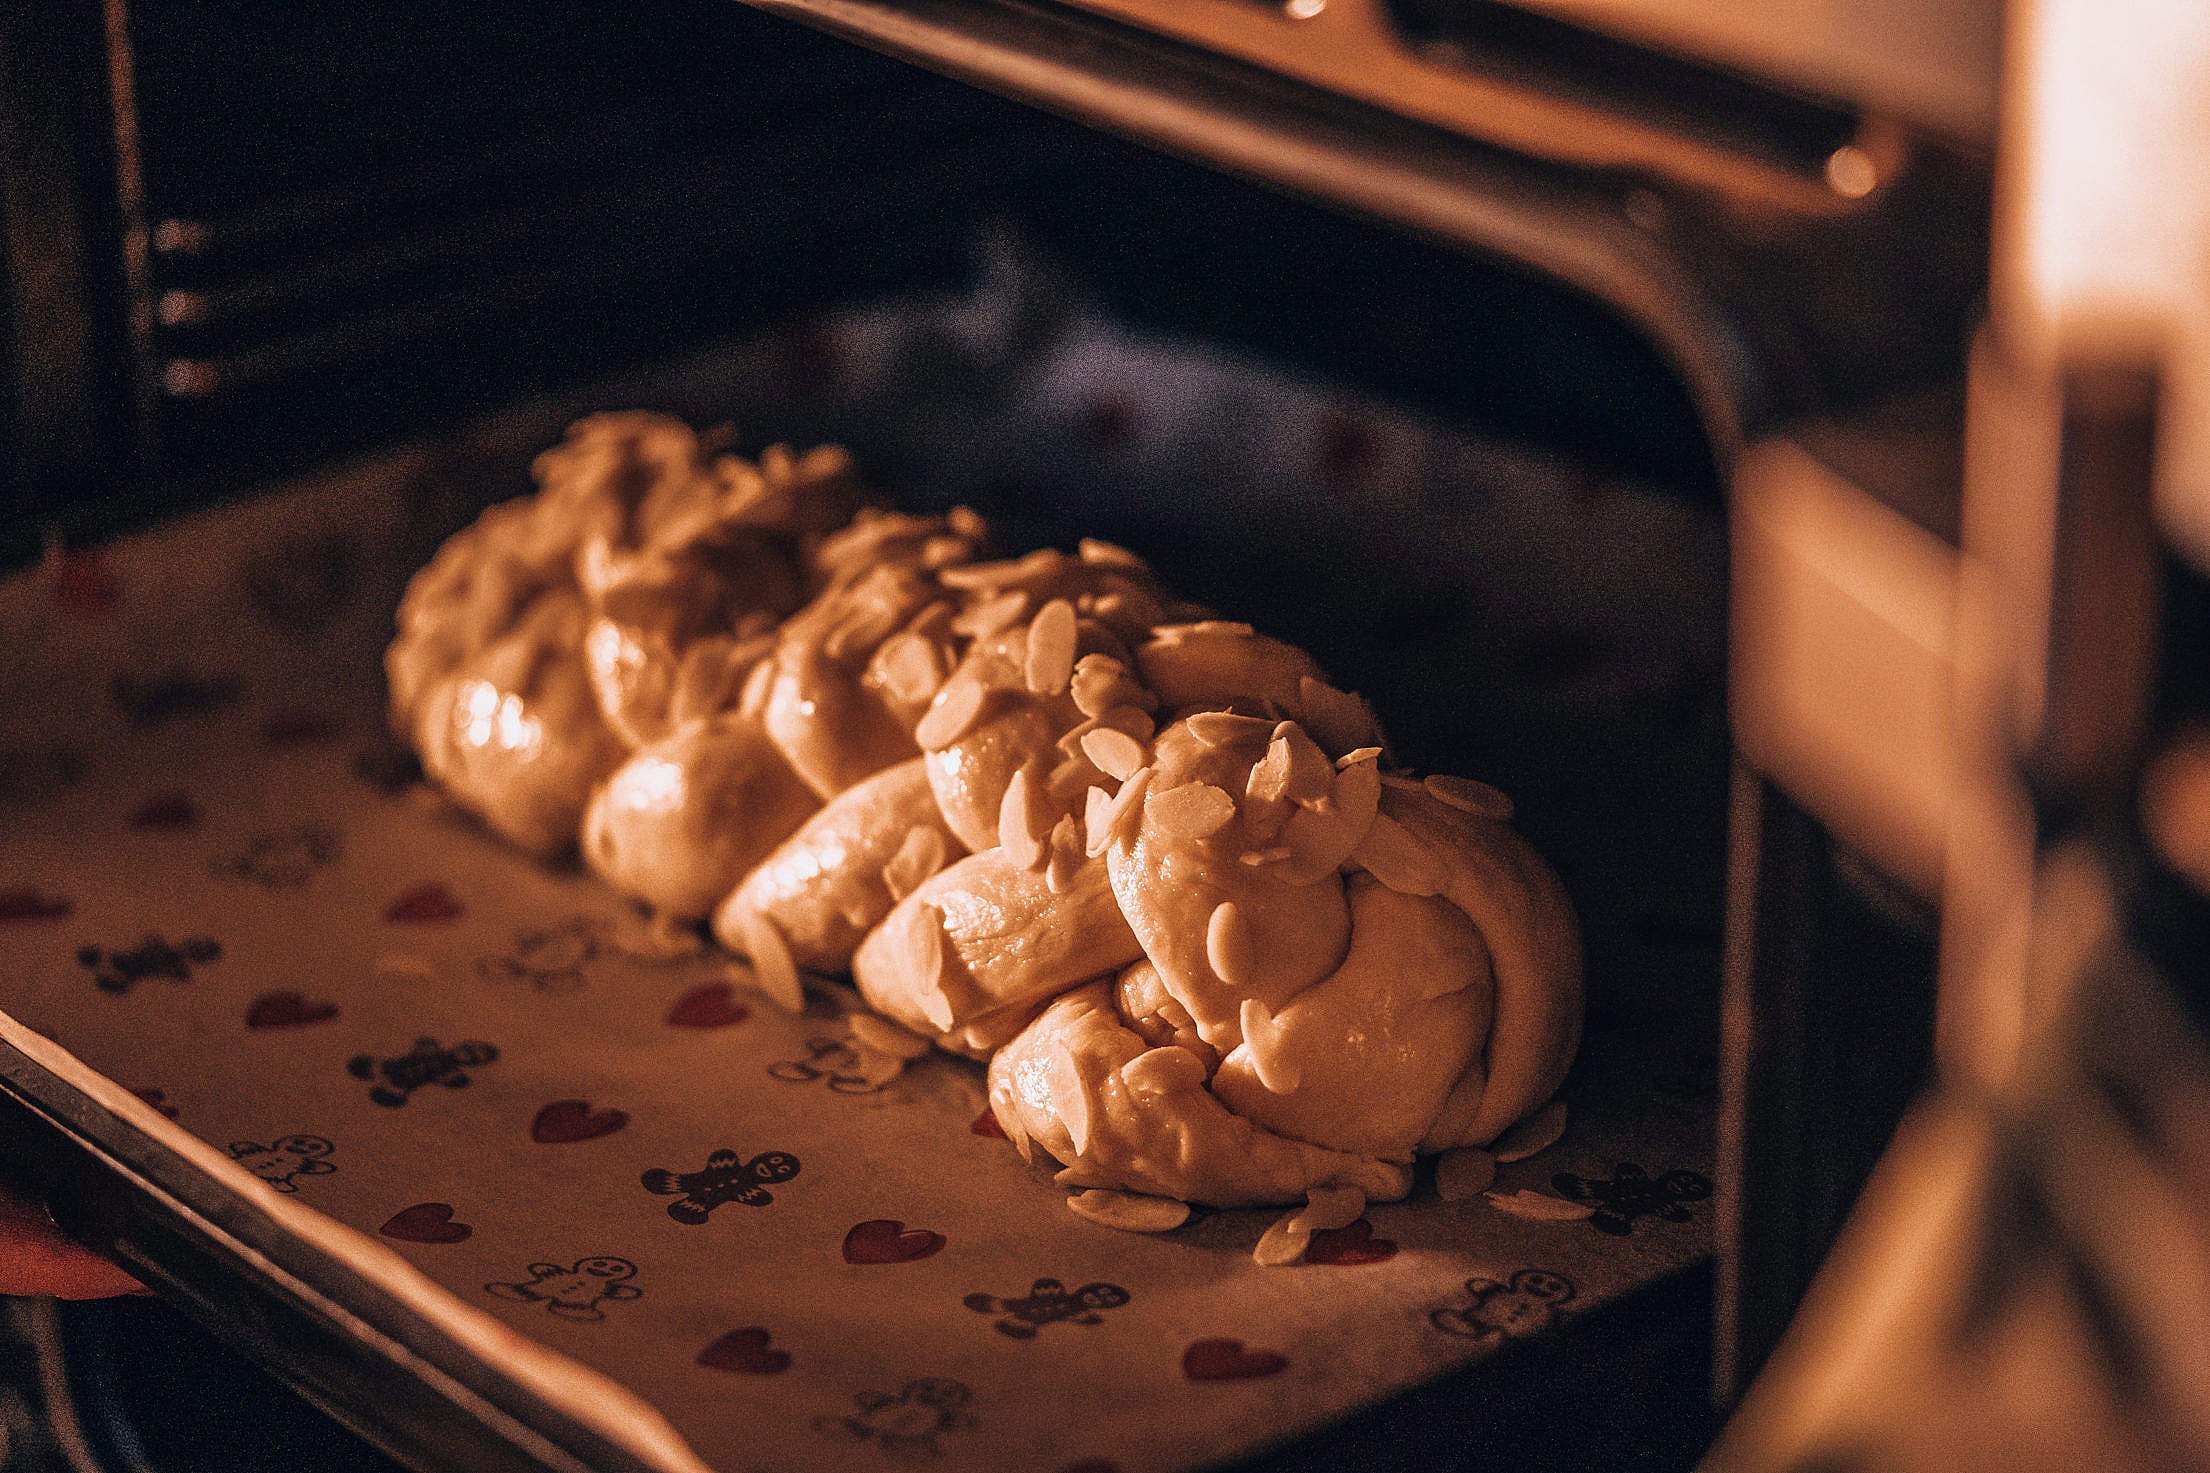 Homemade Braided Sweet Bread in the Oven Free Stock Photo